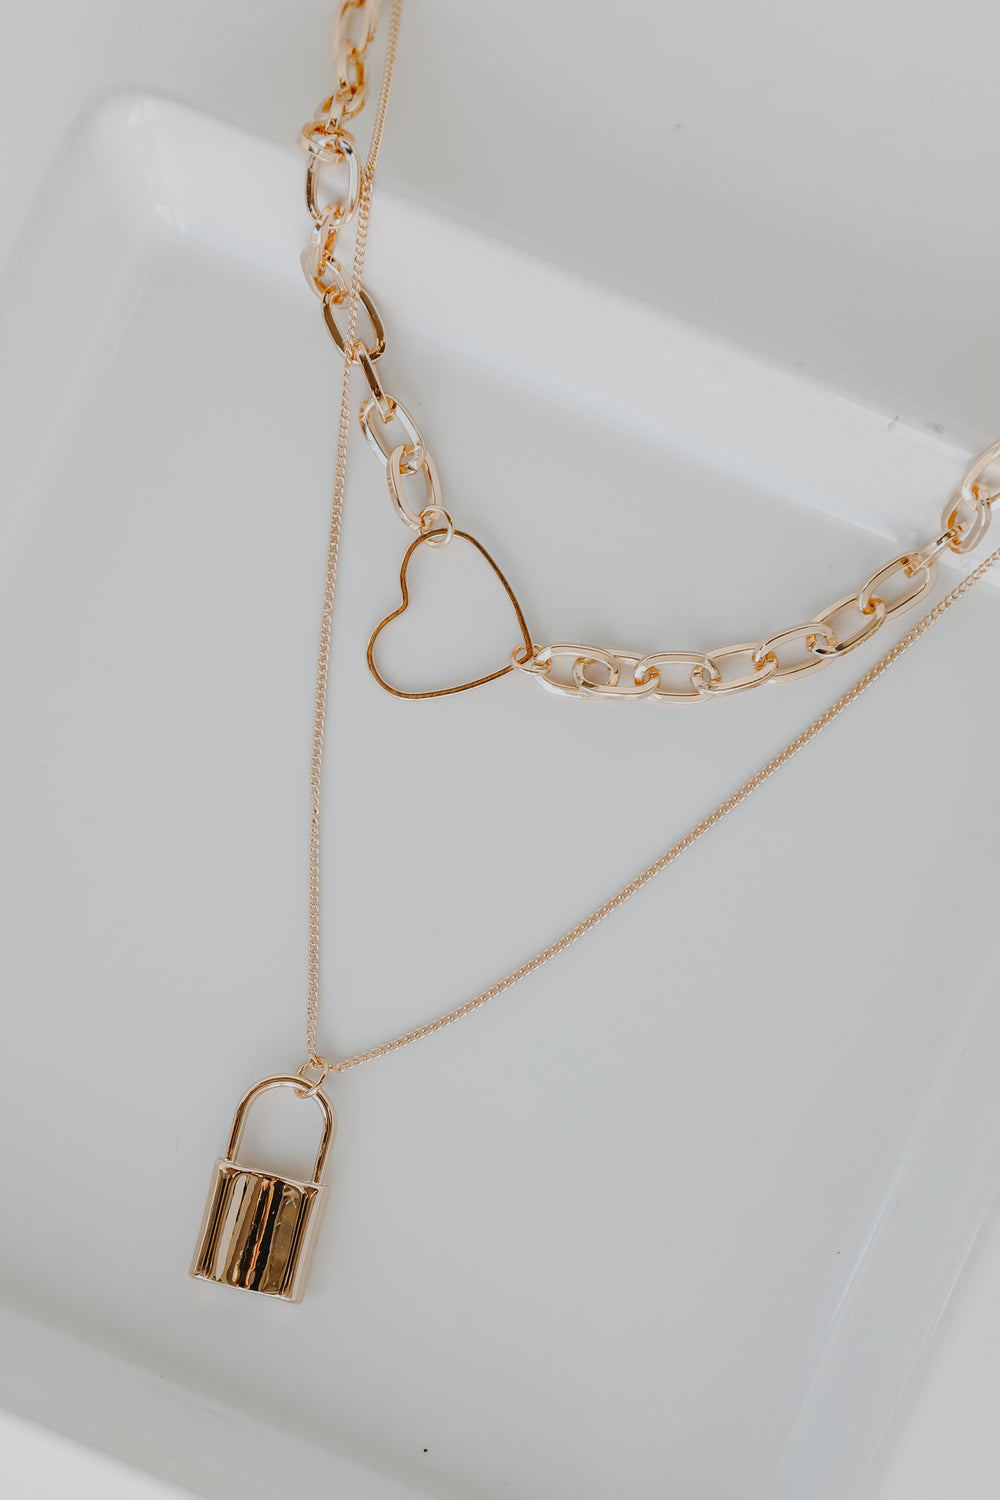 Gold Heart + Lock Layered Necklace from dress up